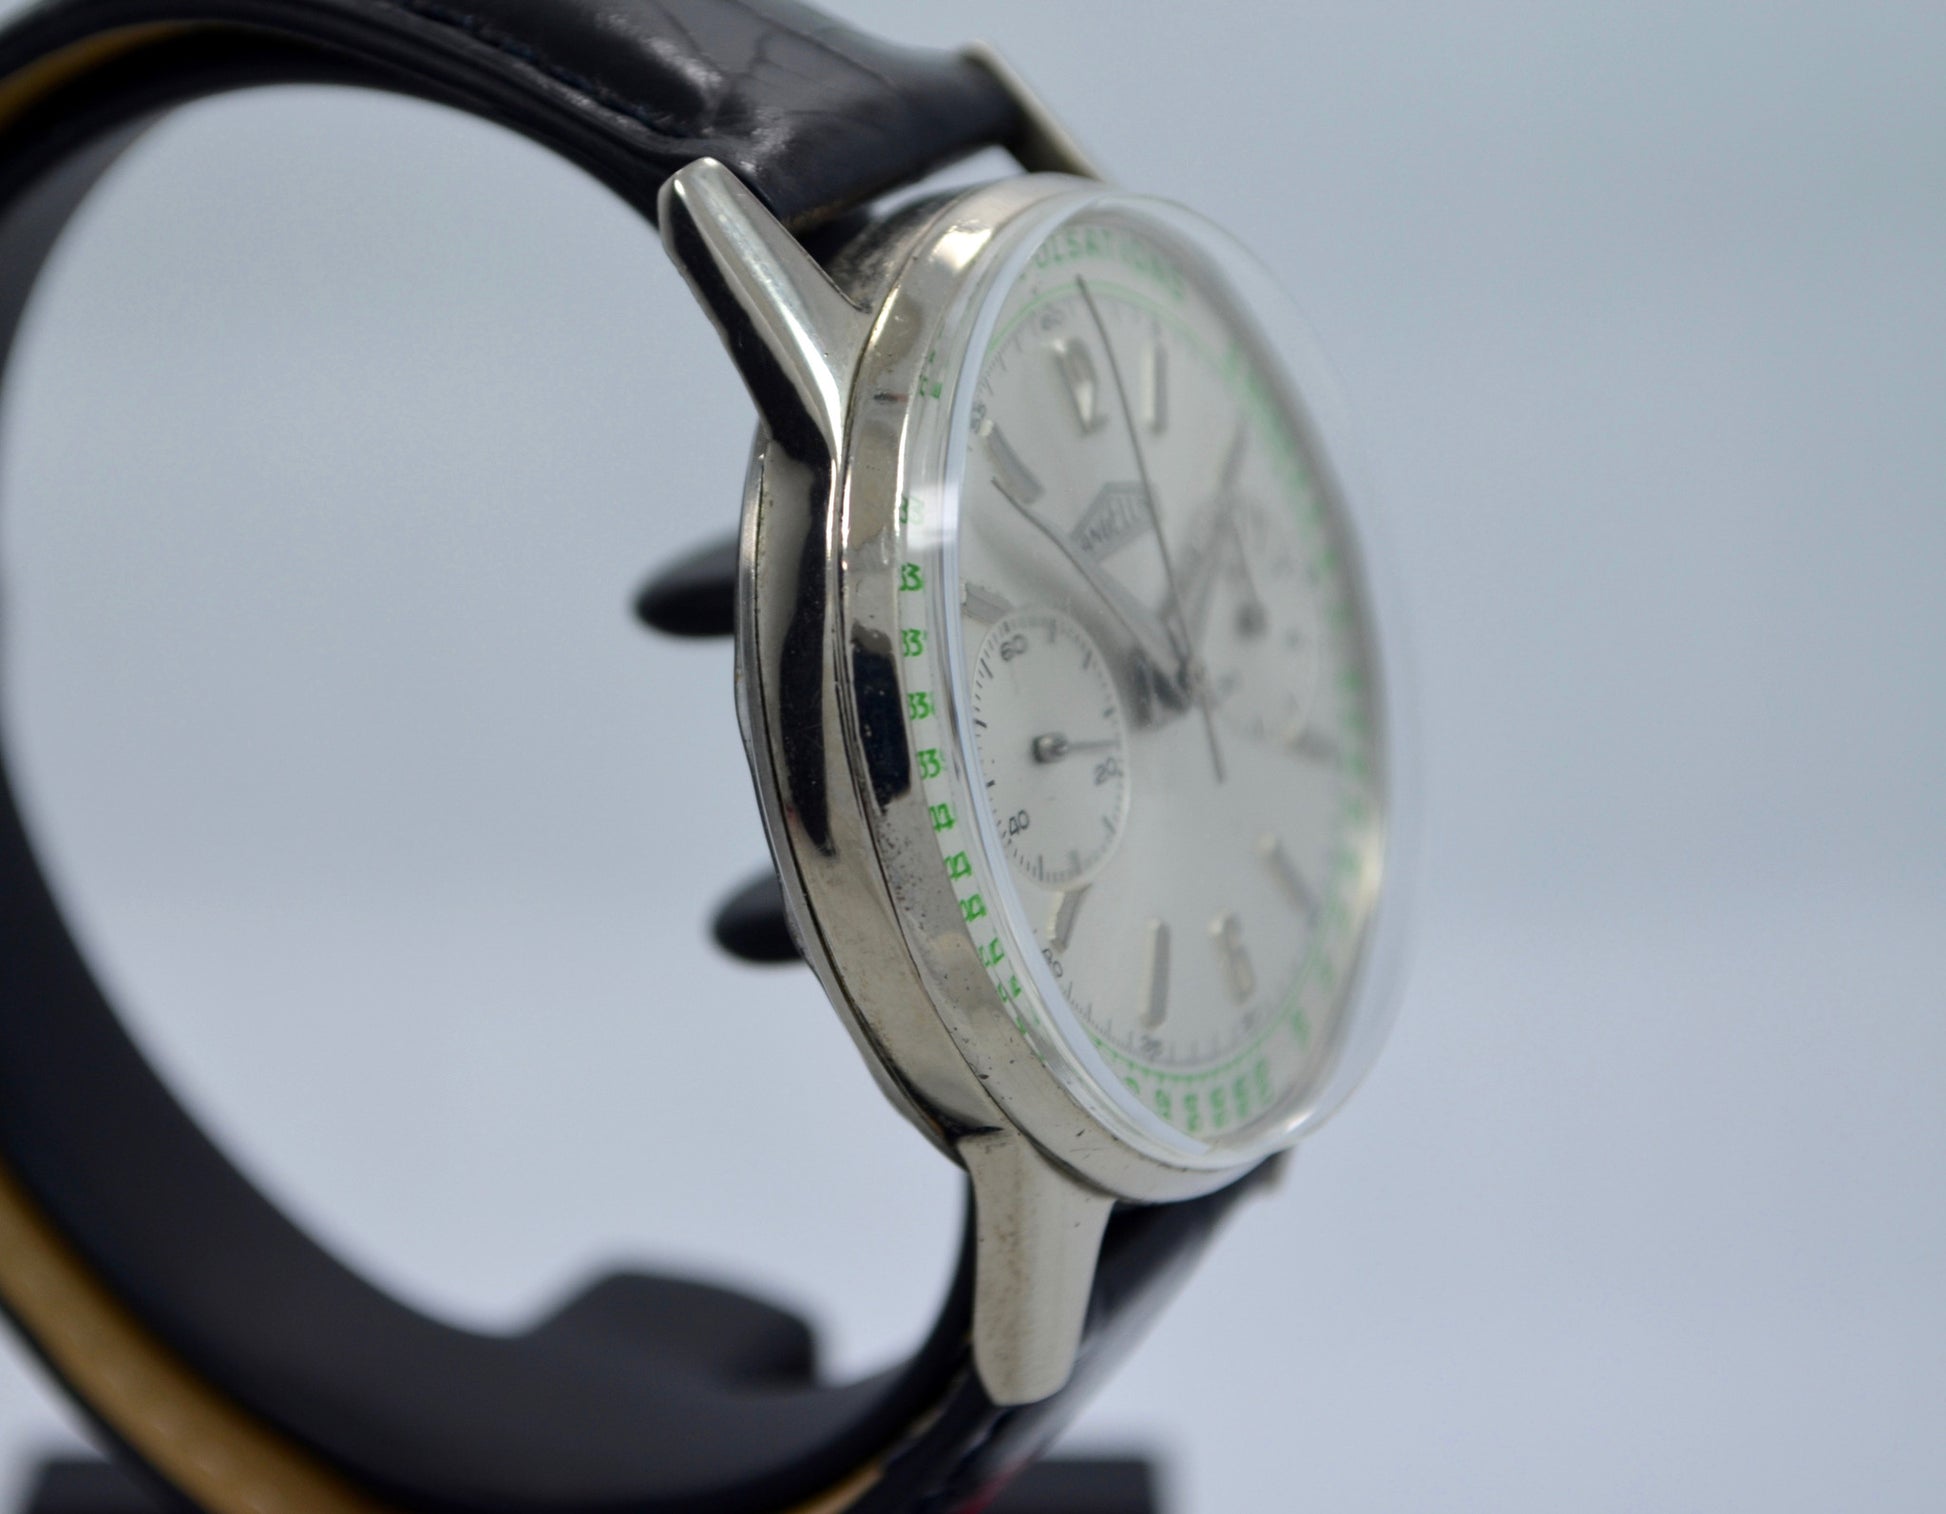 Vintage Angelus Steel Chronograph Pulsations Oversized Manual Wind Watch - Hashtag Watch Company